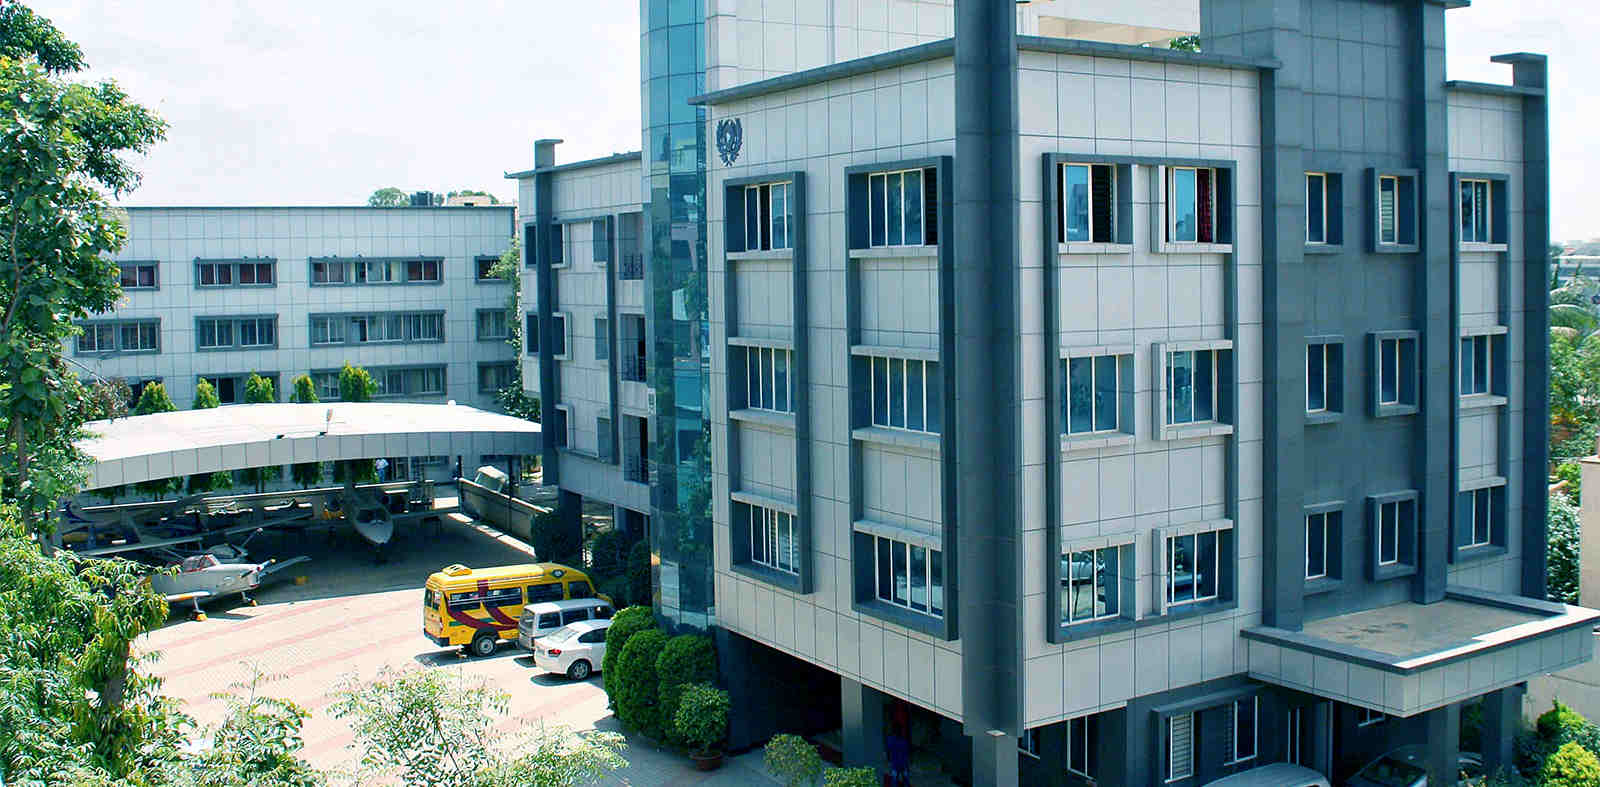 Hindustan Business School Bangalore Admission, Courses, Eligibility, Fees, Facilities